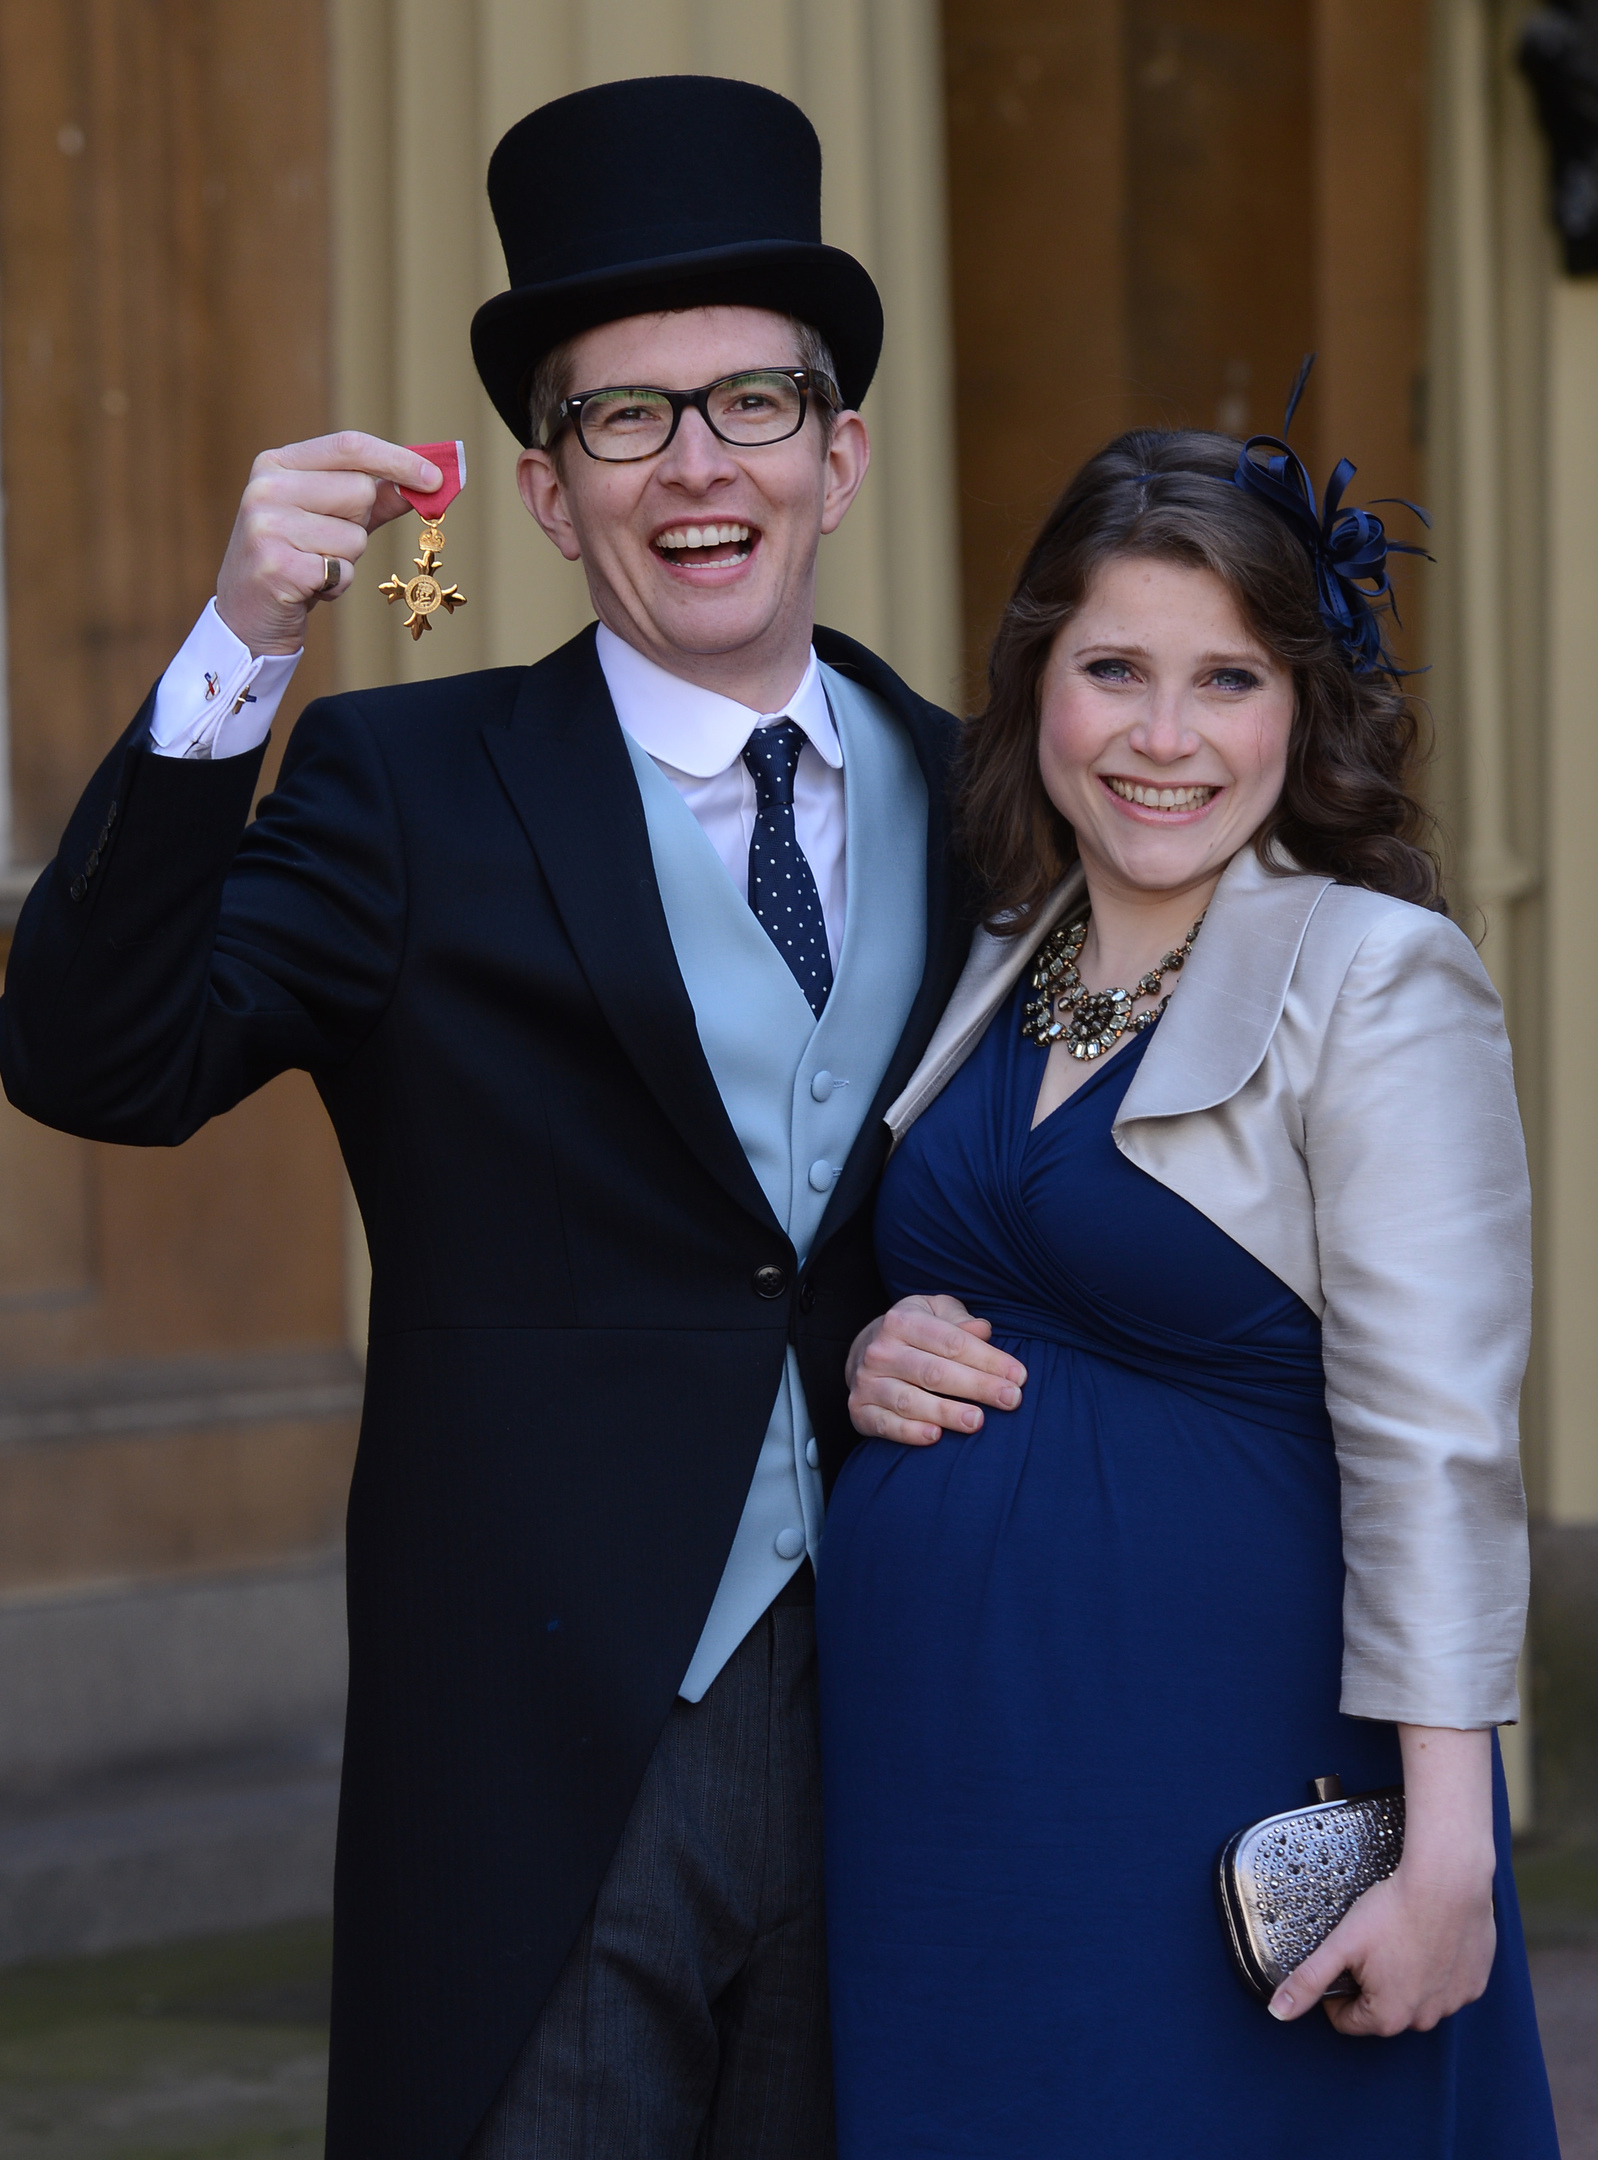 Choirmaster Gareth Malone and his wife Rebecca at Buckingham Palace where he received an OBE (Photo by Stefan Rousseau - WPA Pool /Getty Images)